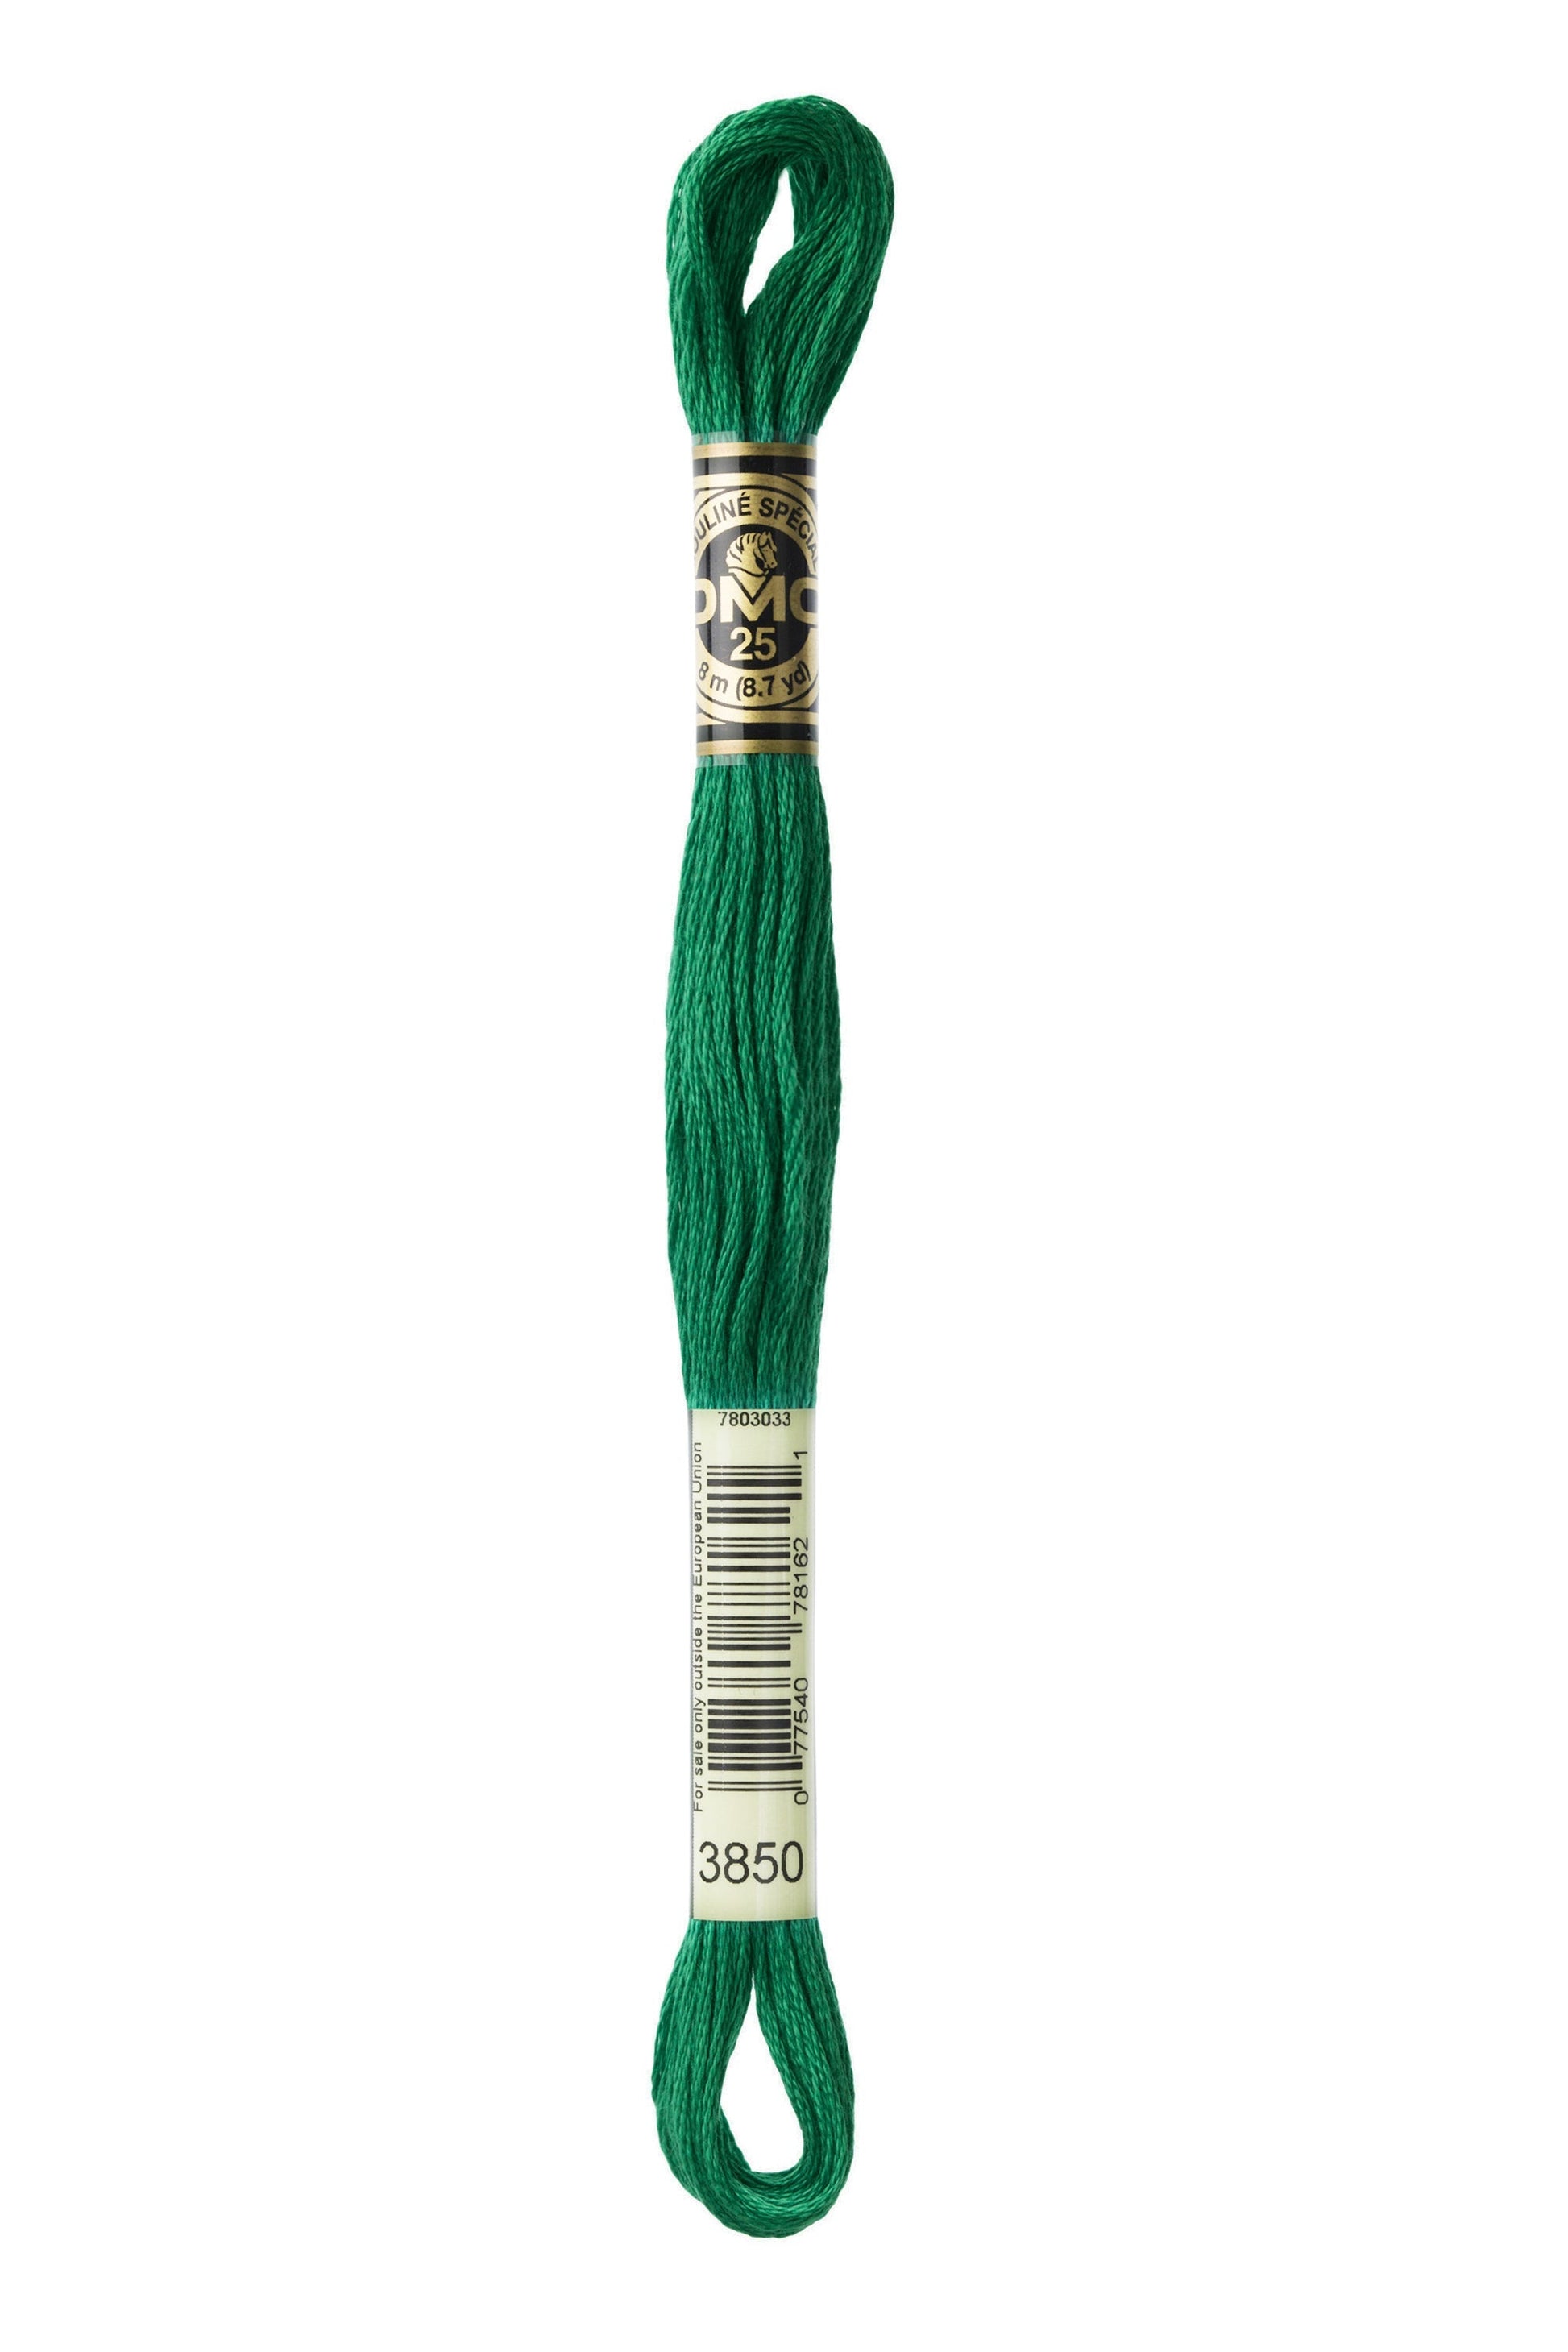 Six-Strand Embroidery Floss - 3850 (Emerald)-Embroidery Thread-Wild and Woolly Yarns